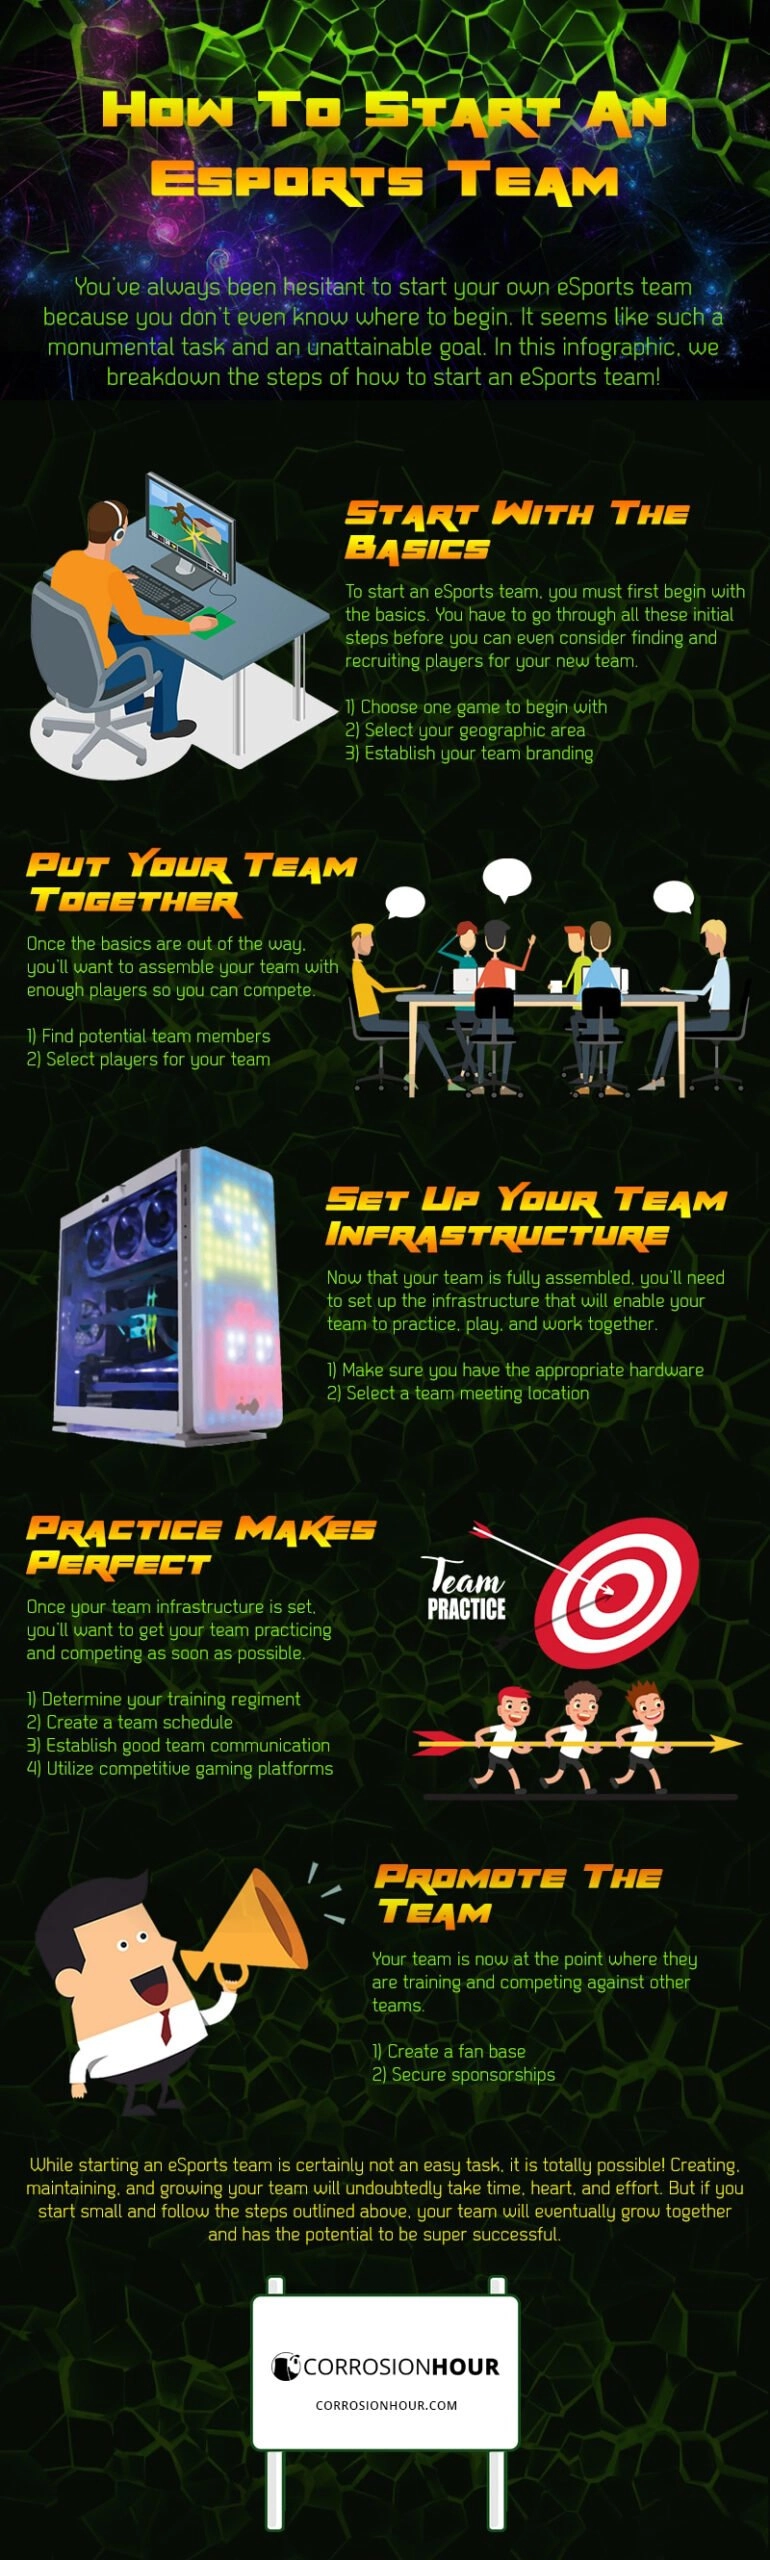 How to Start an eSports Team Infographic